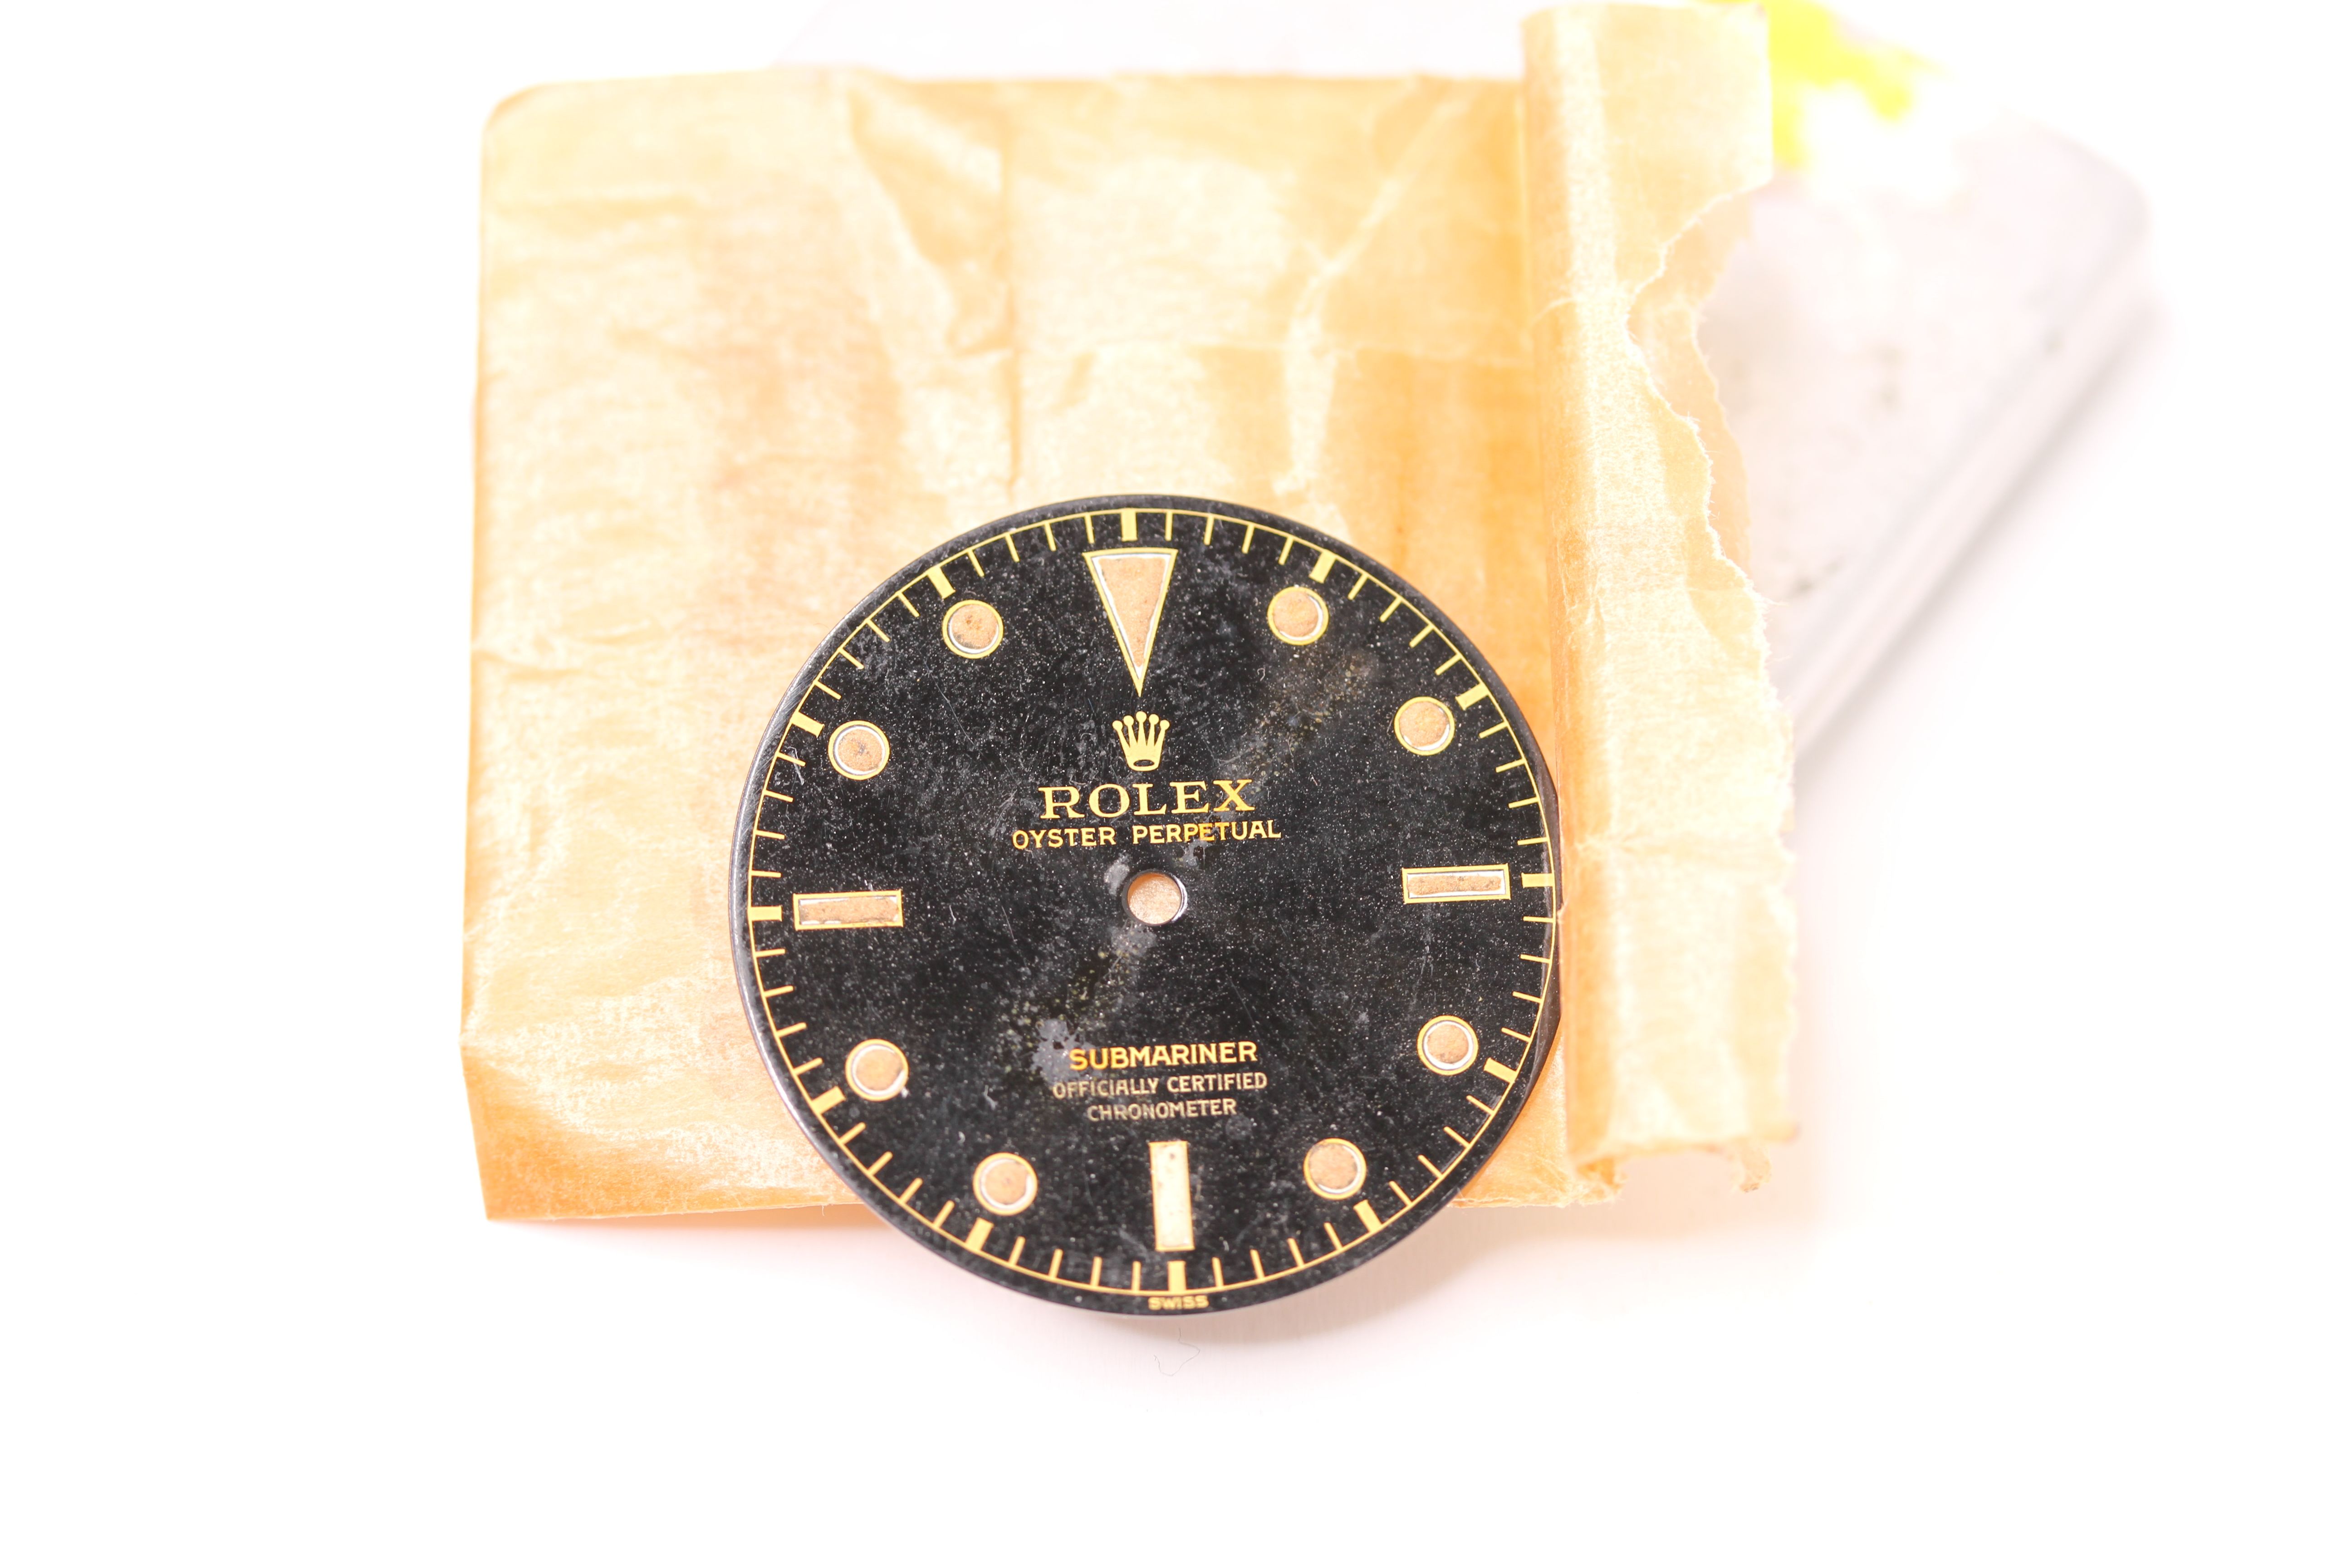 ROLEX SUBMARINER DIAL OFFICIALLY CERTIFIED CHRONOMETER REF 5508 CIRCA 1950s, gloss dial with gilt - Image 2 of 9